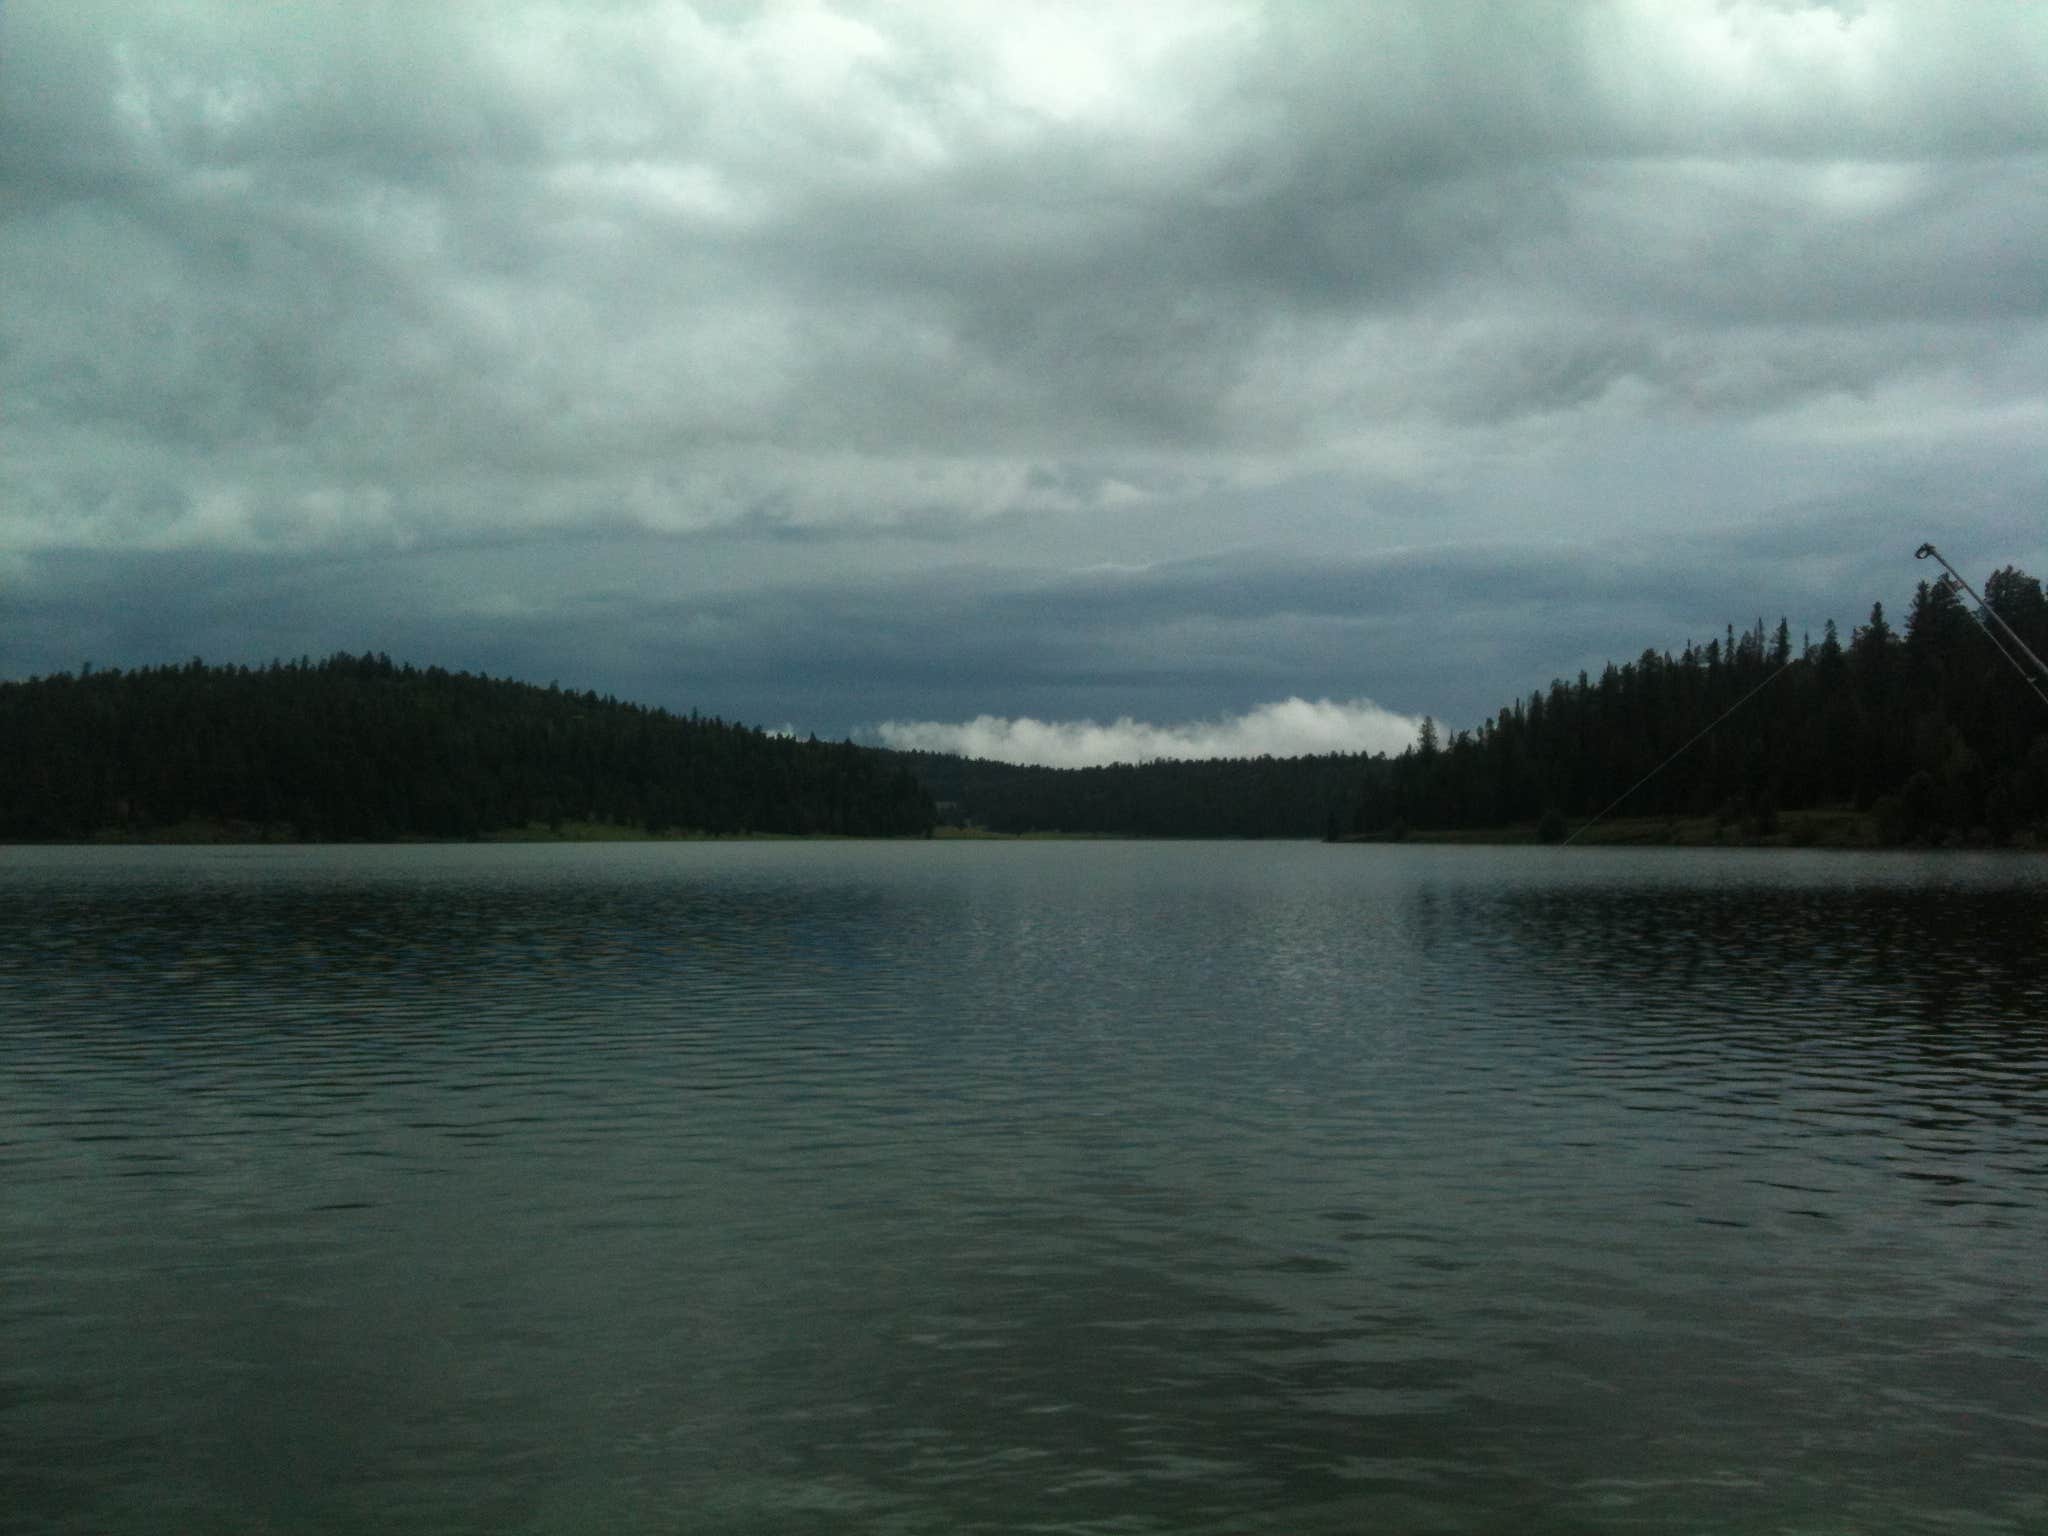 Camper submitted image from Reservation Lake - 1